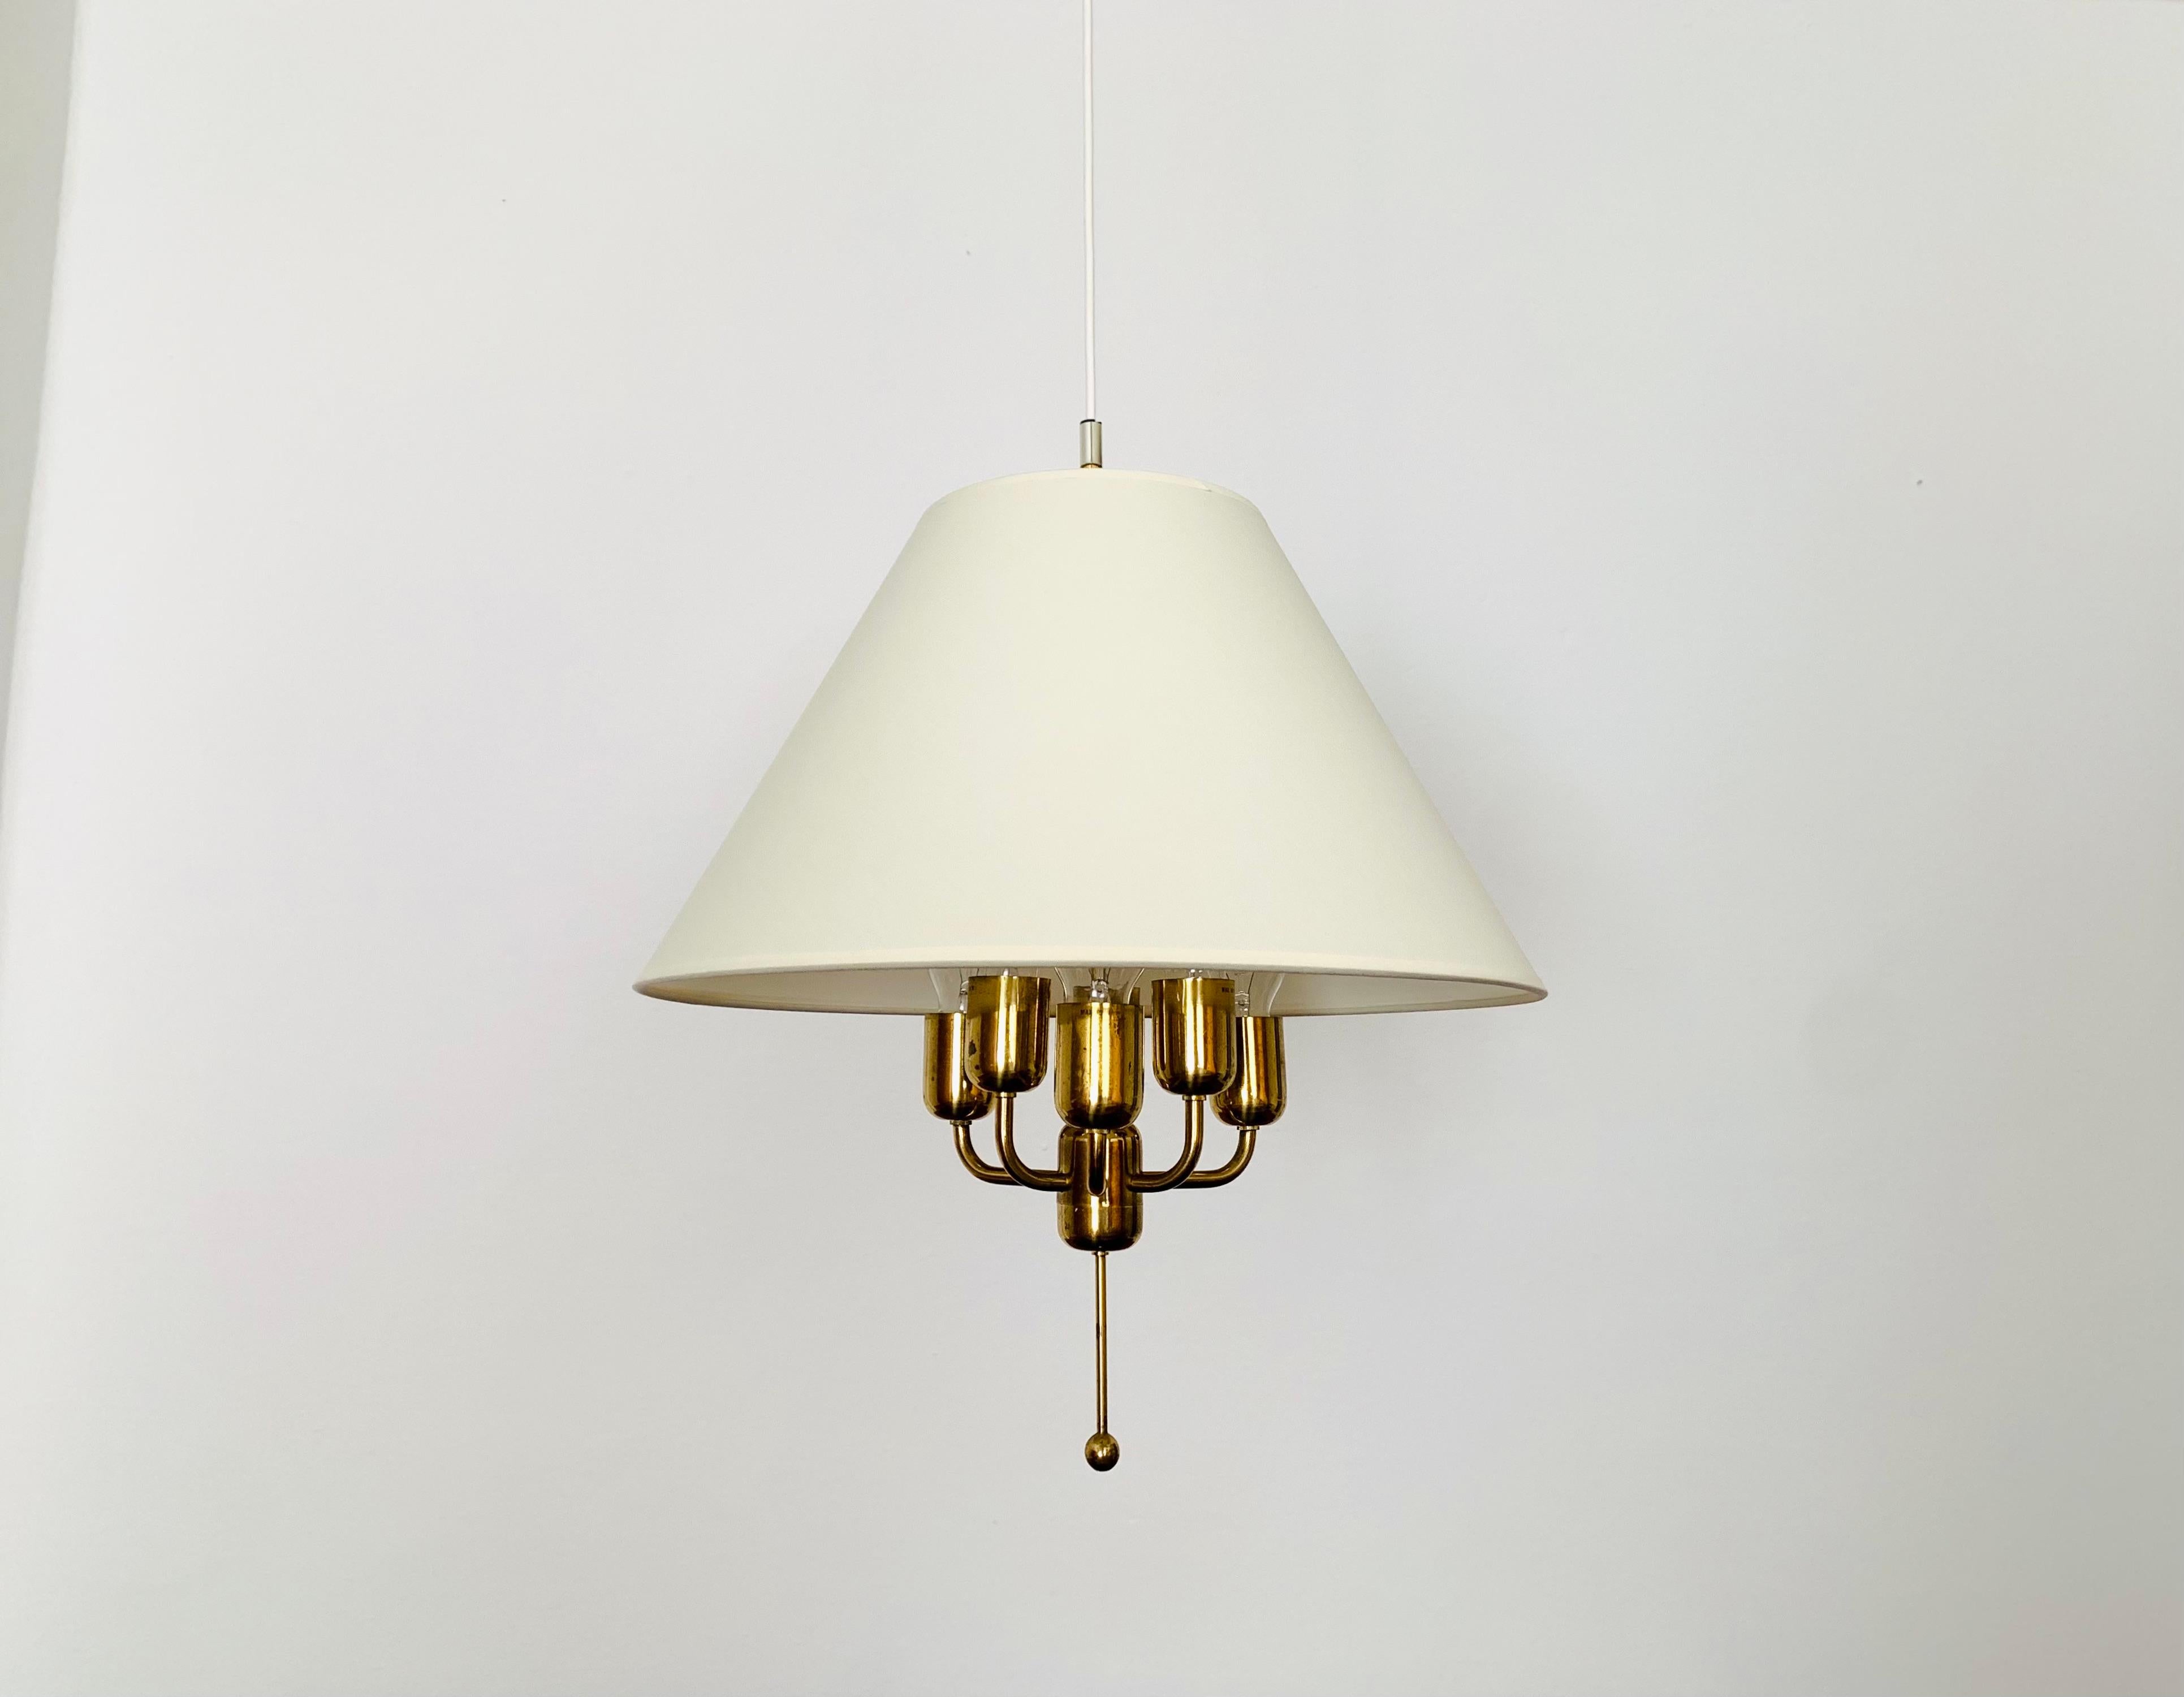 Wonderful brass pendant lamp from the 1960s.
The lamp with the floating shade is a real asset and an absolute favorite for every home.
A very pleasant and warm light is created.

Condition:

Very good vintage condition with slight signs of wear